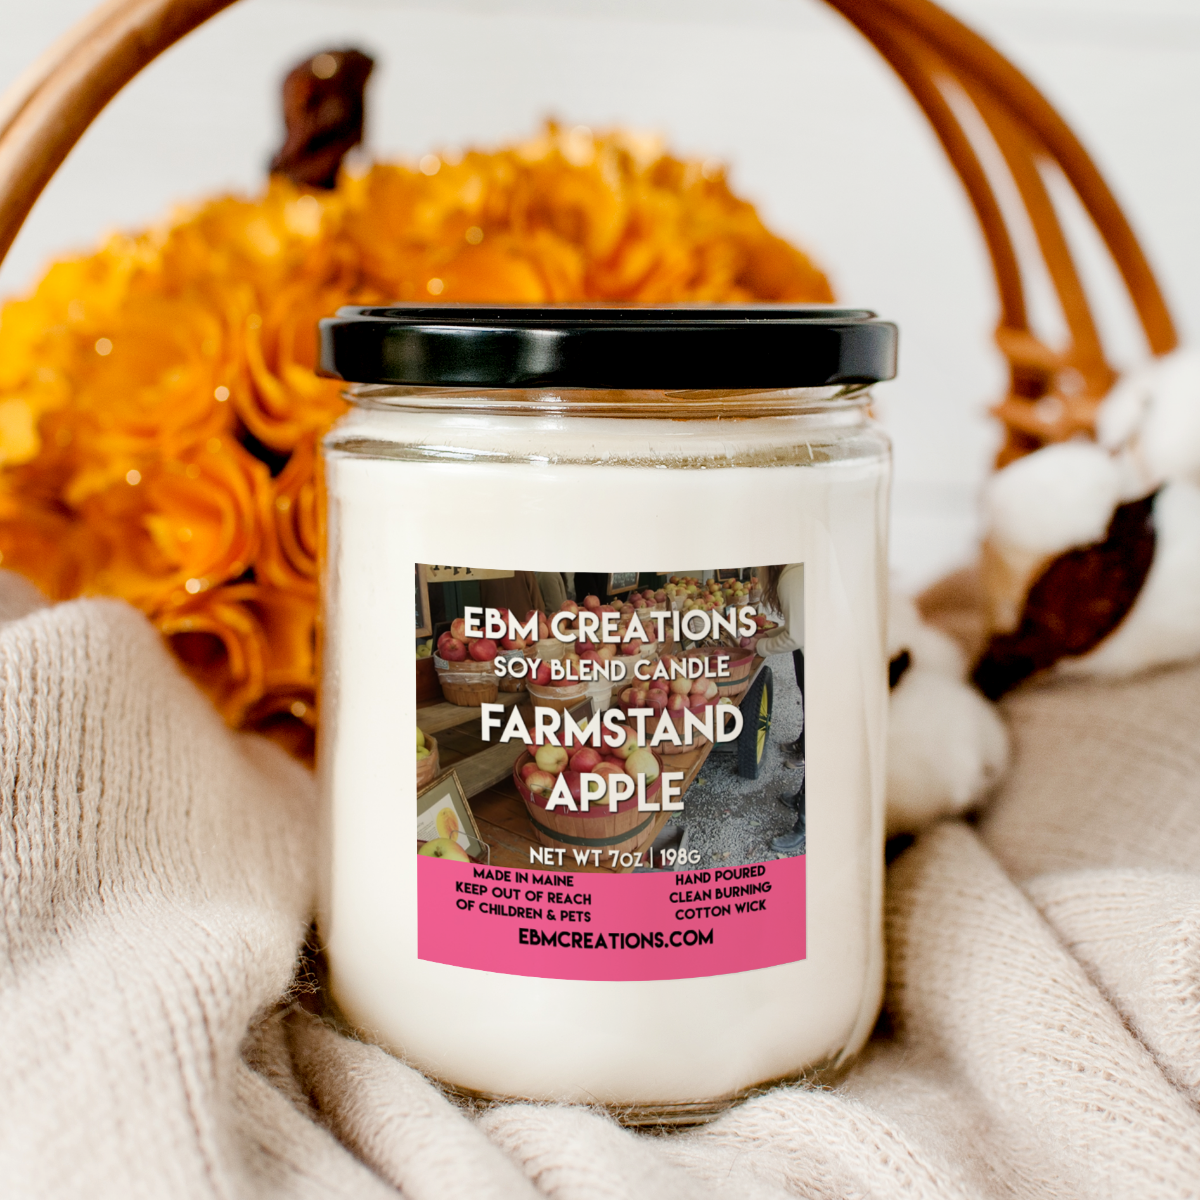 Farmstand Apple - 7oz  Soy Blend Candle